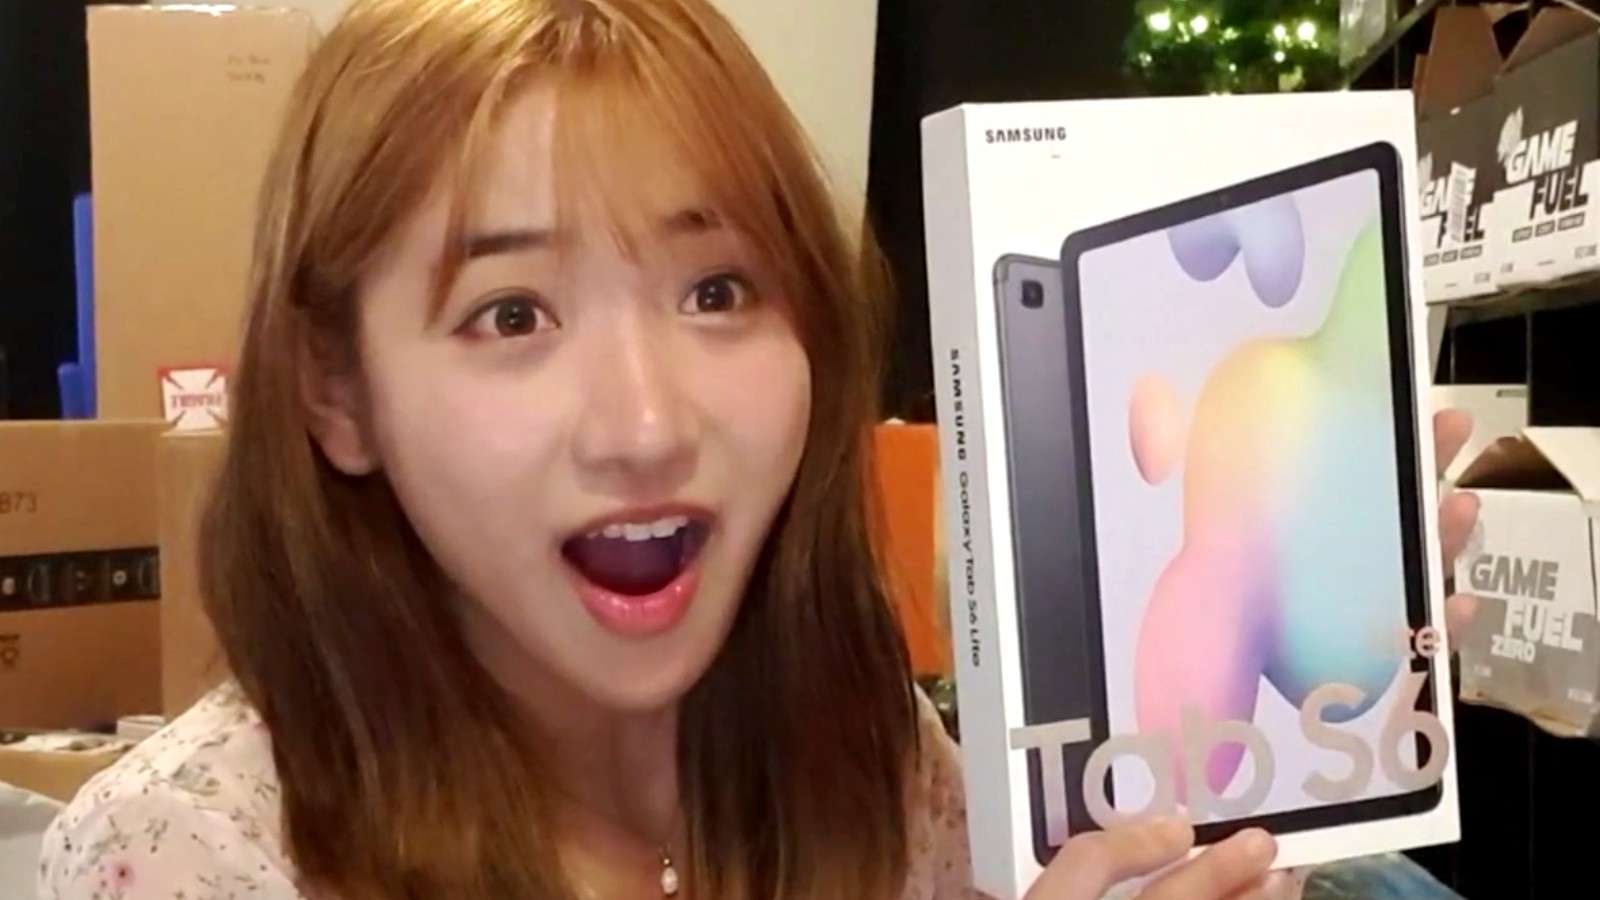 Twitch streamer Jinny showing the camera what a fan gifted her